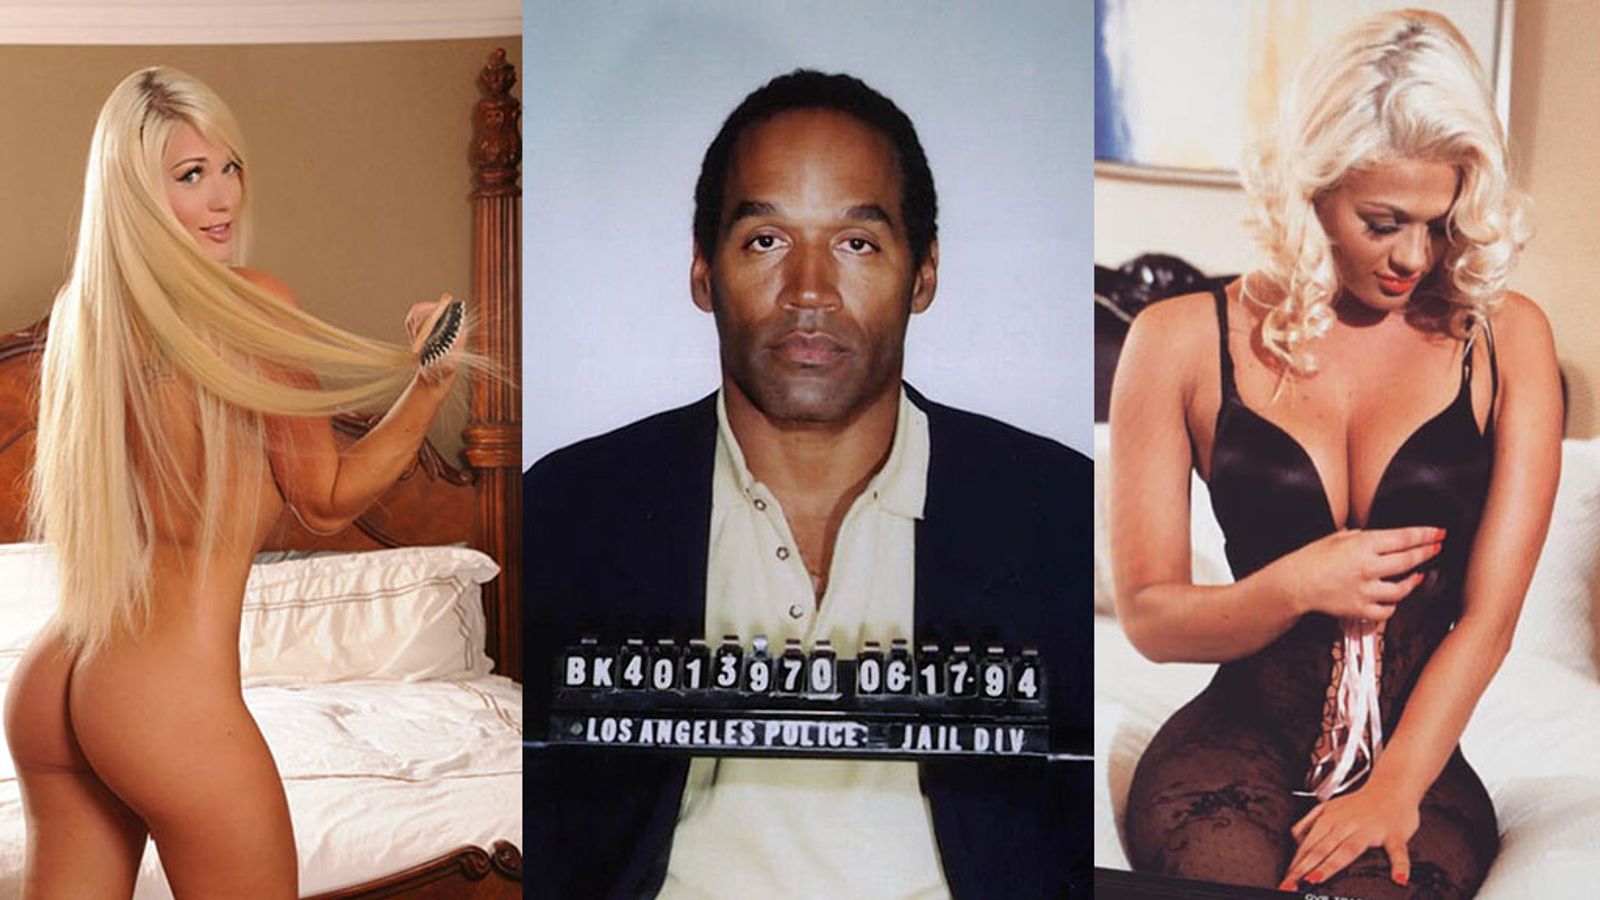 Rumor Has It That O.J. Would Like to Party at the Bunny Ranch